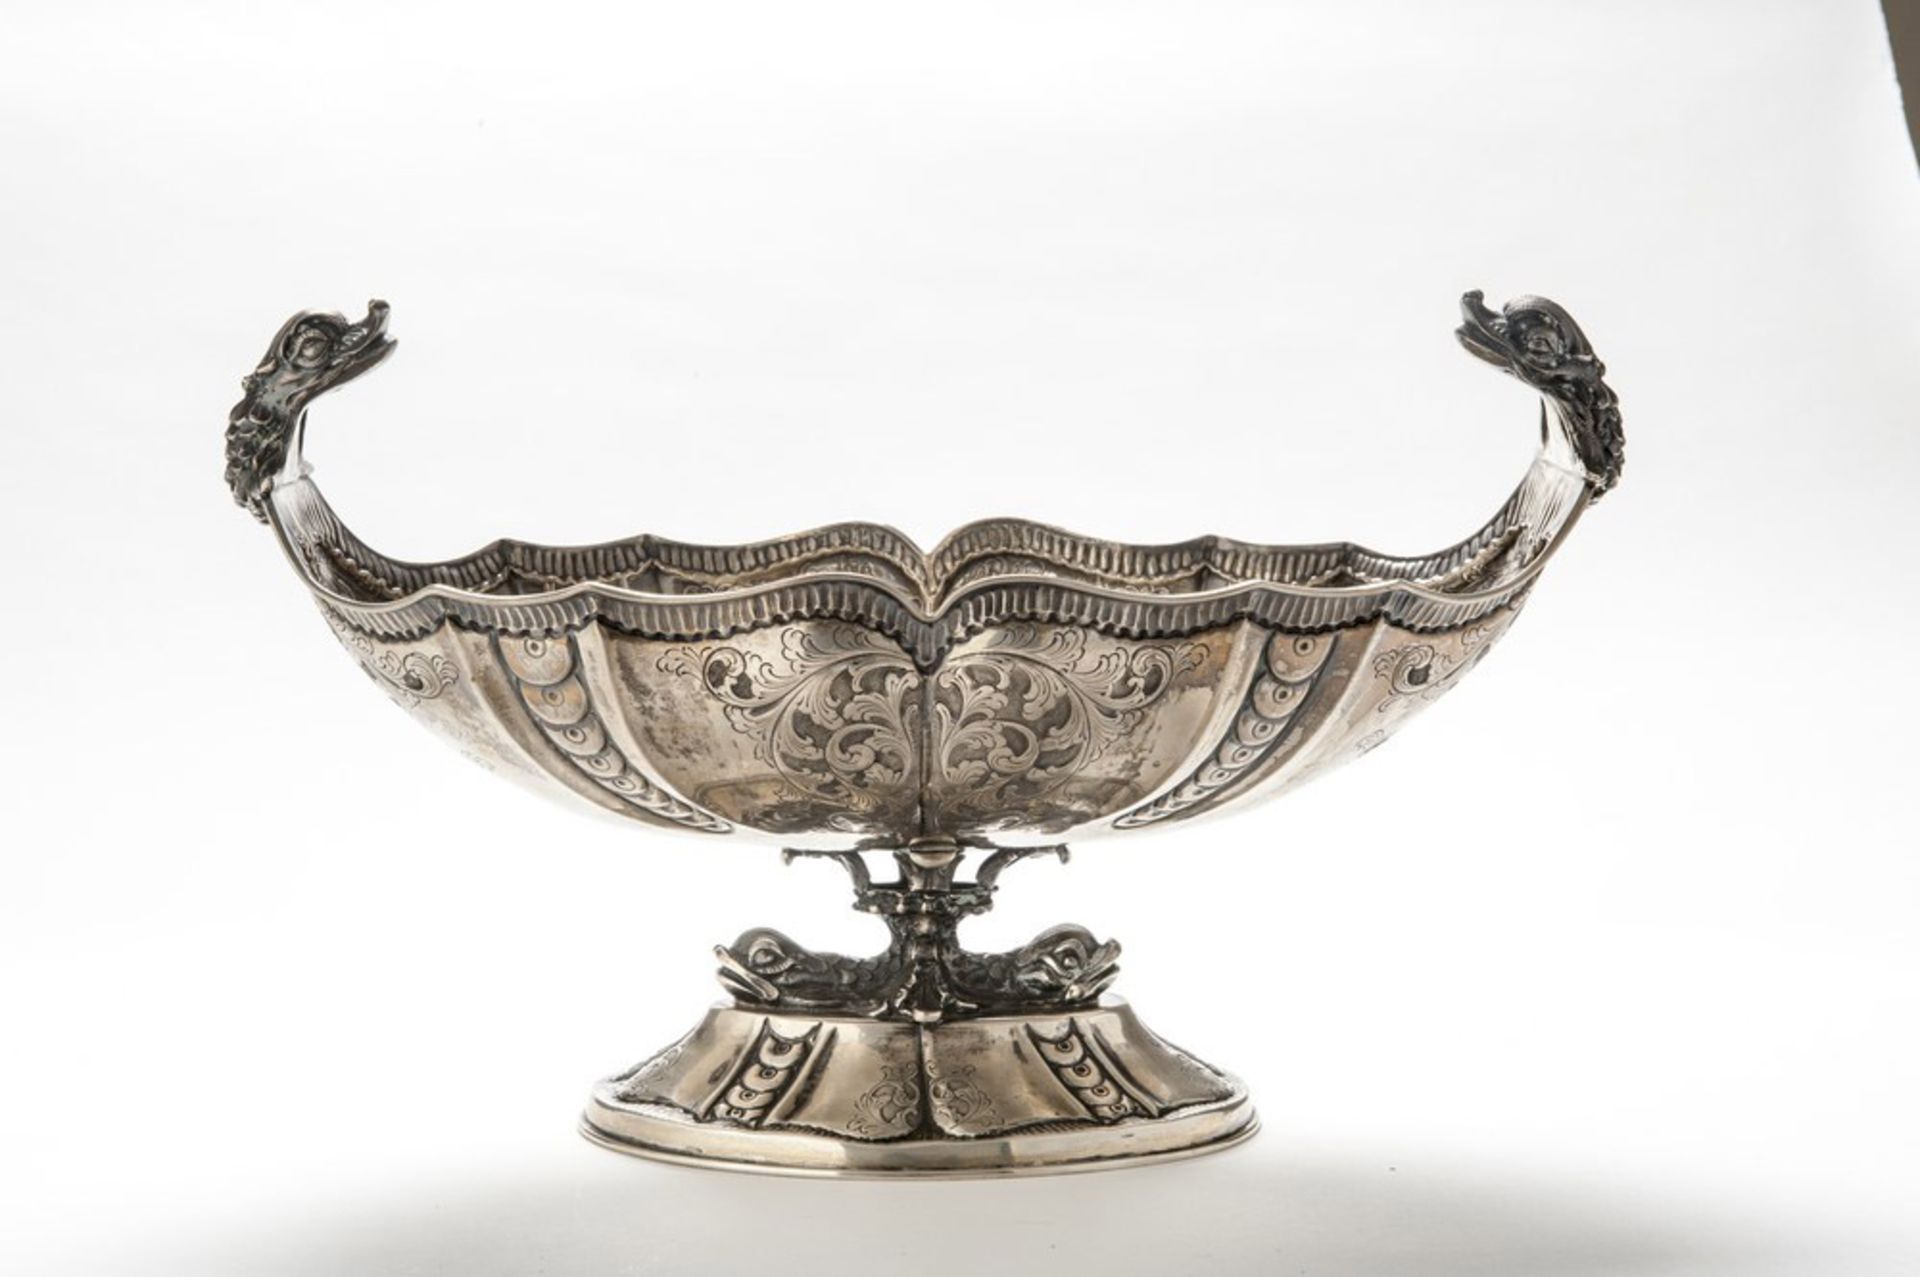 SILVER CENTERPIECE, PUNCH MILAN 1944/1968 chiseled to vegetable motifs and fishes scale, handles